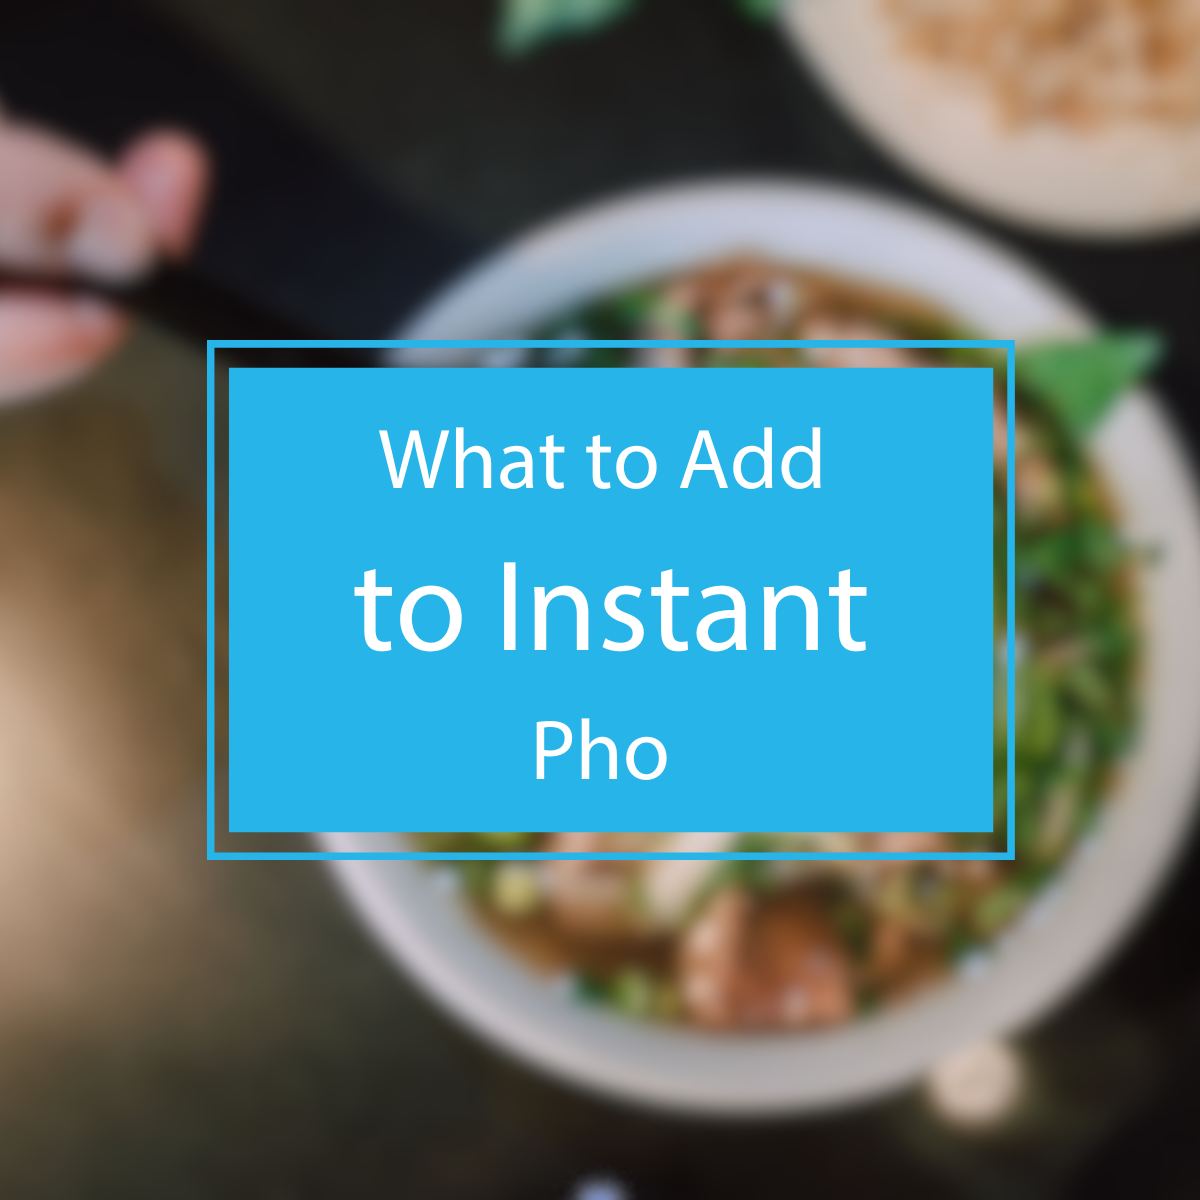 What to Add to Instant Pho?